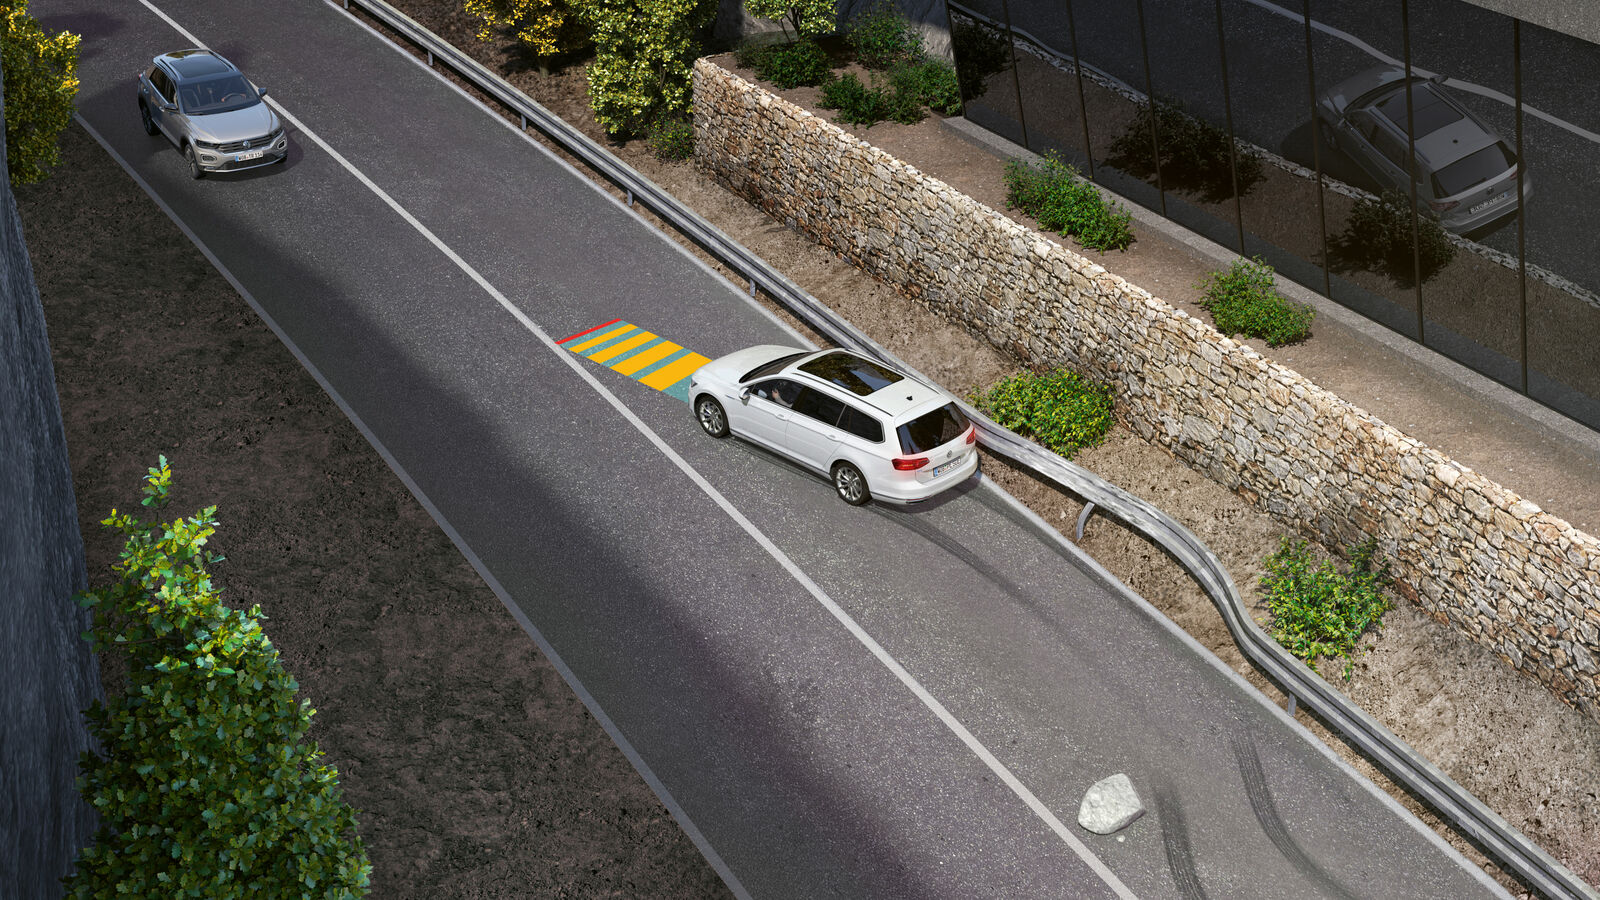 Automatic Post-Collision Braking System